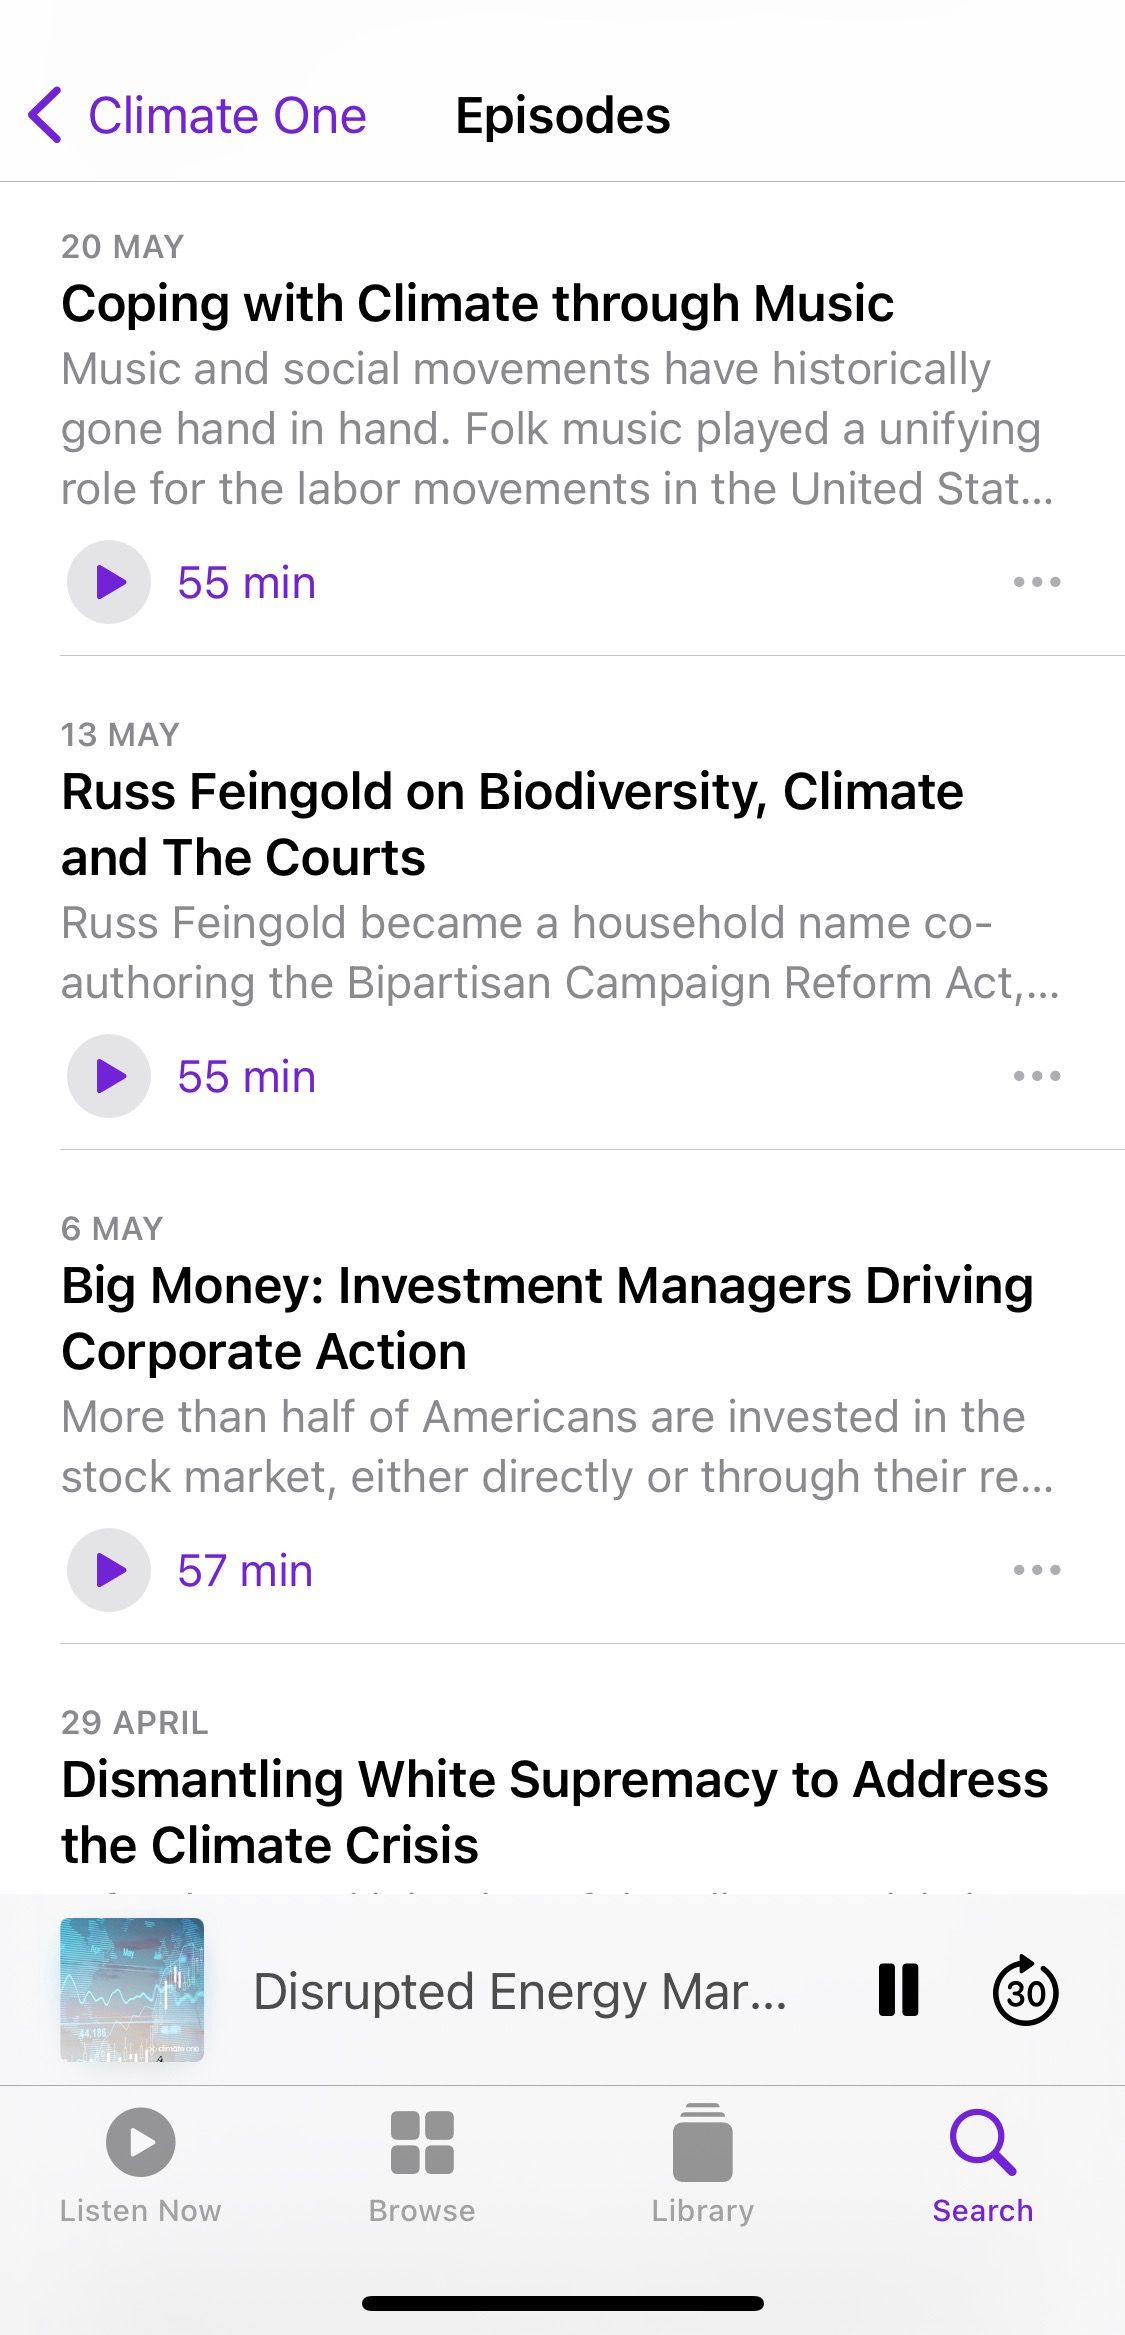 Screenshot showing The Climate One podcast sample episodes